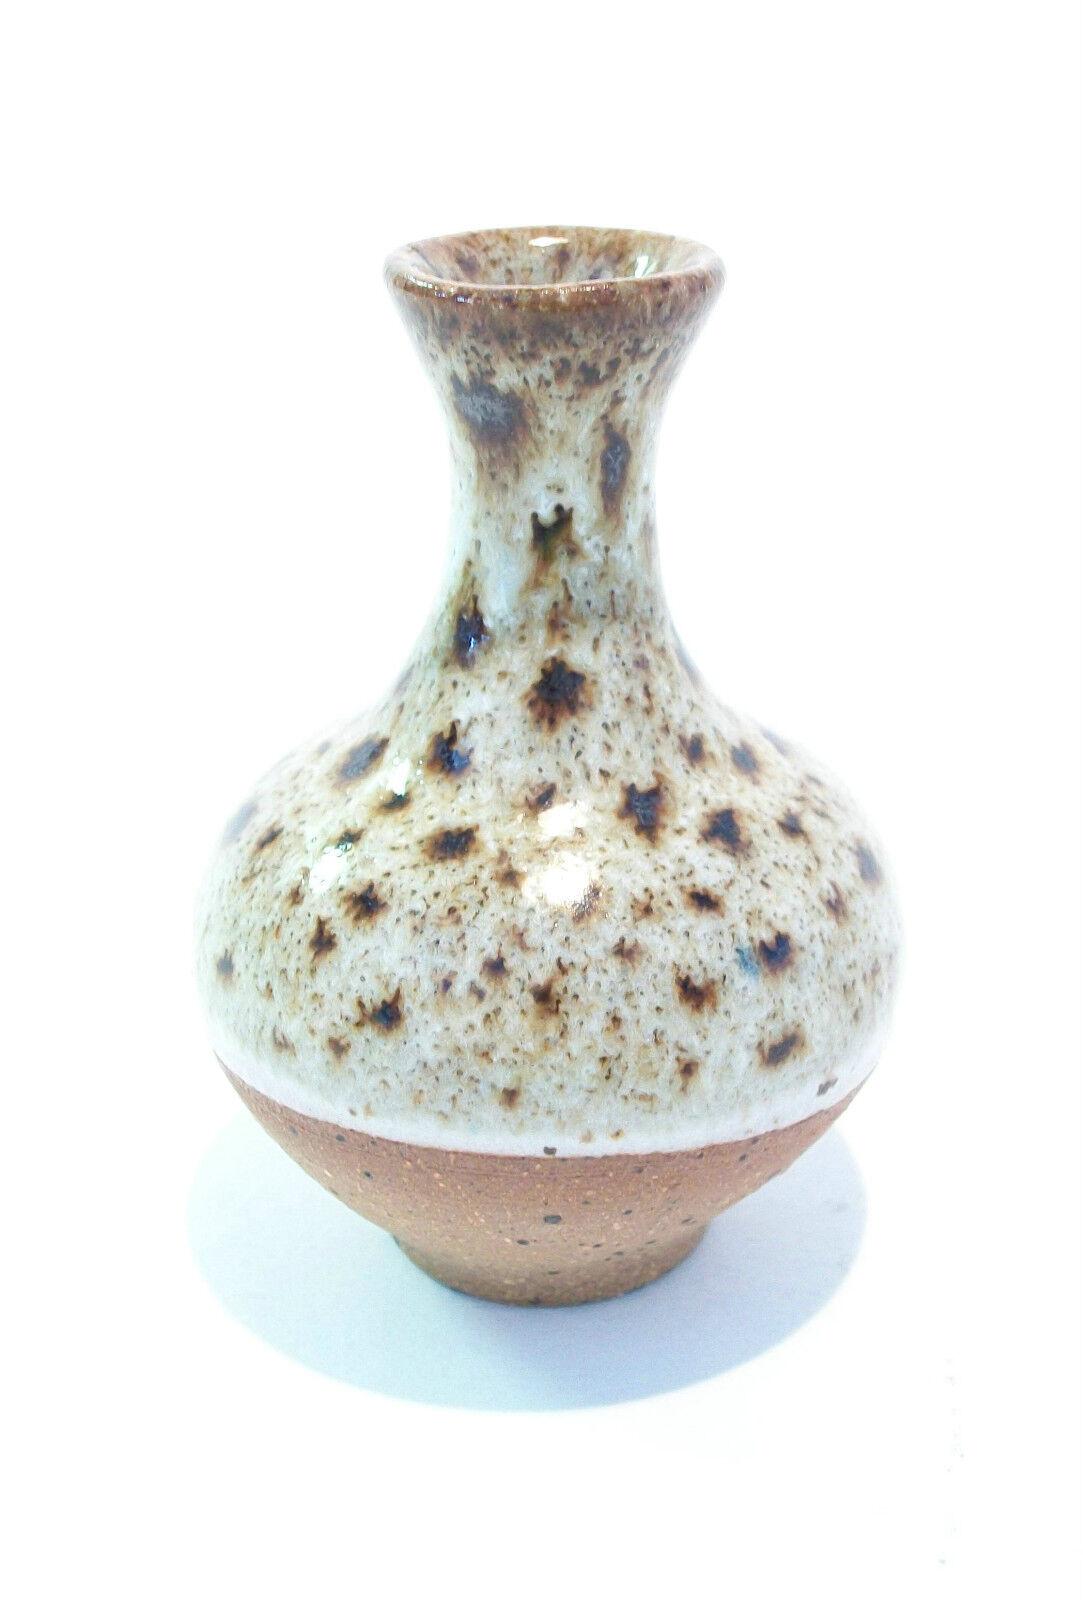 Mid Century miniature glazed studio pottery bud vase - signed/incised initials on the base 'D.R.' - circa 1970's.

Excellent vintage condition - no loss - no damage - no restoration.

Size - 1 7/8